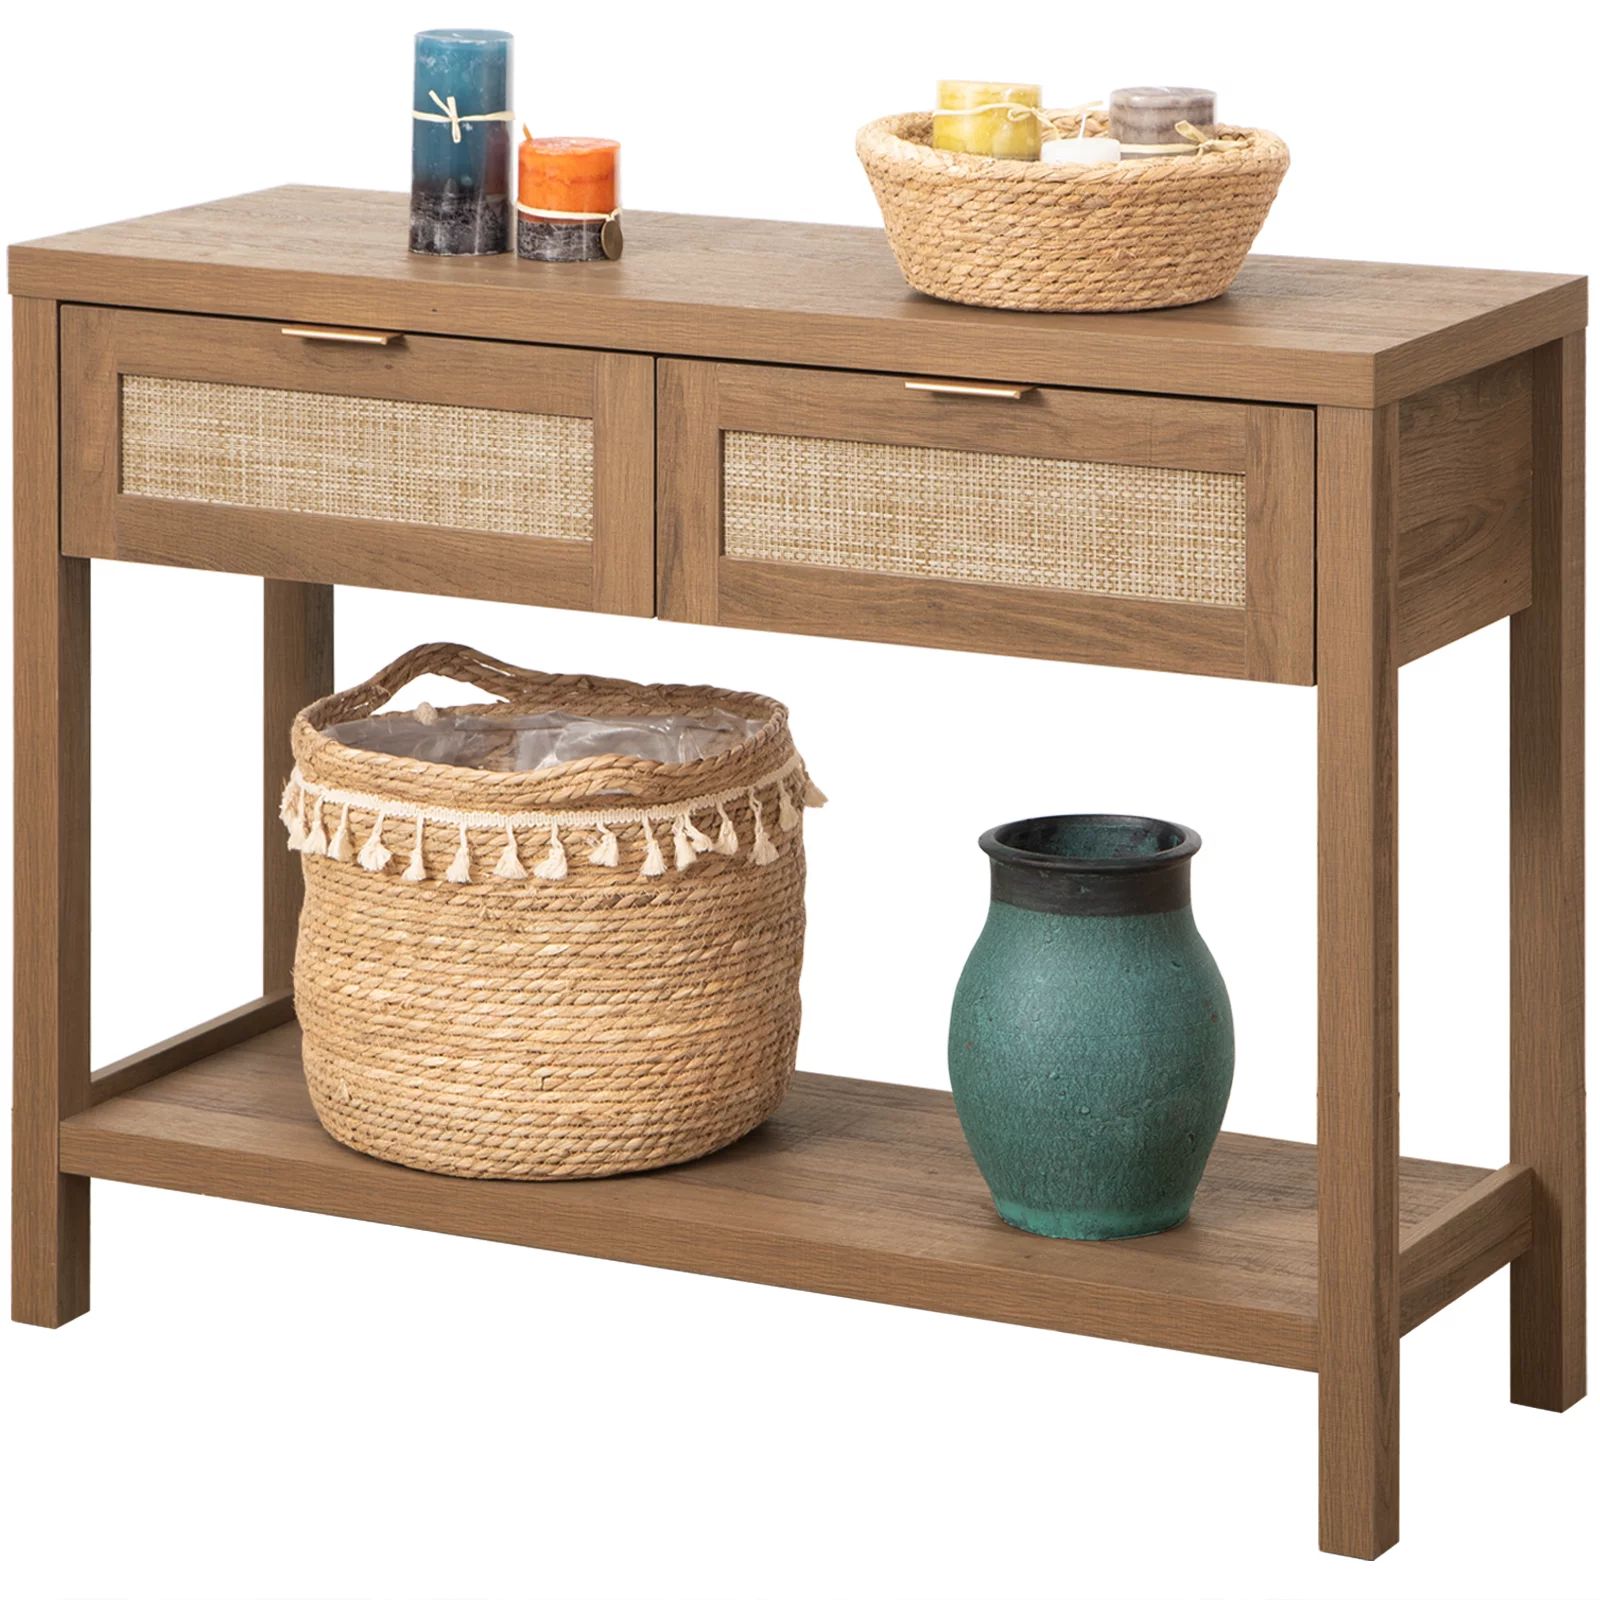 SICOTAS Rattan Console Table with Drawers, Wood Narrow Sofa Table Entryway Table for Hallway, Liv... | Walmart (US)